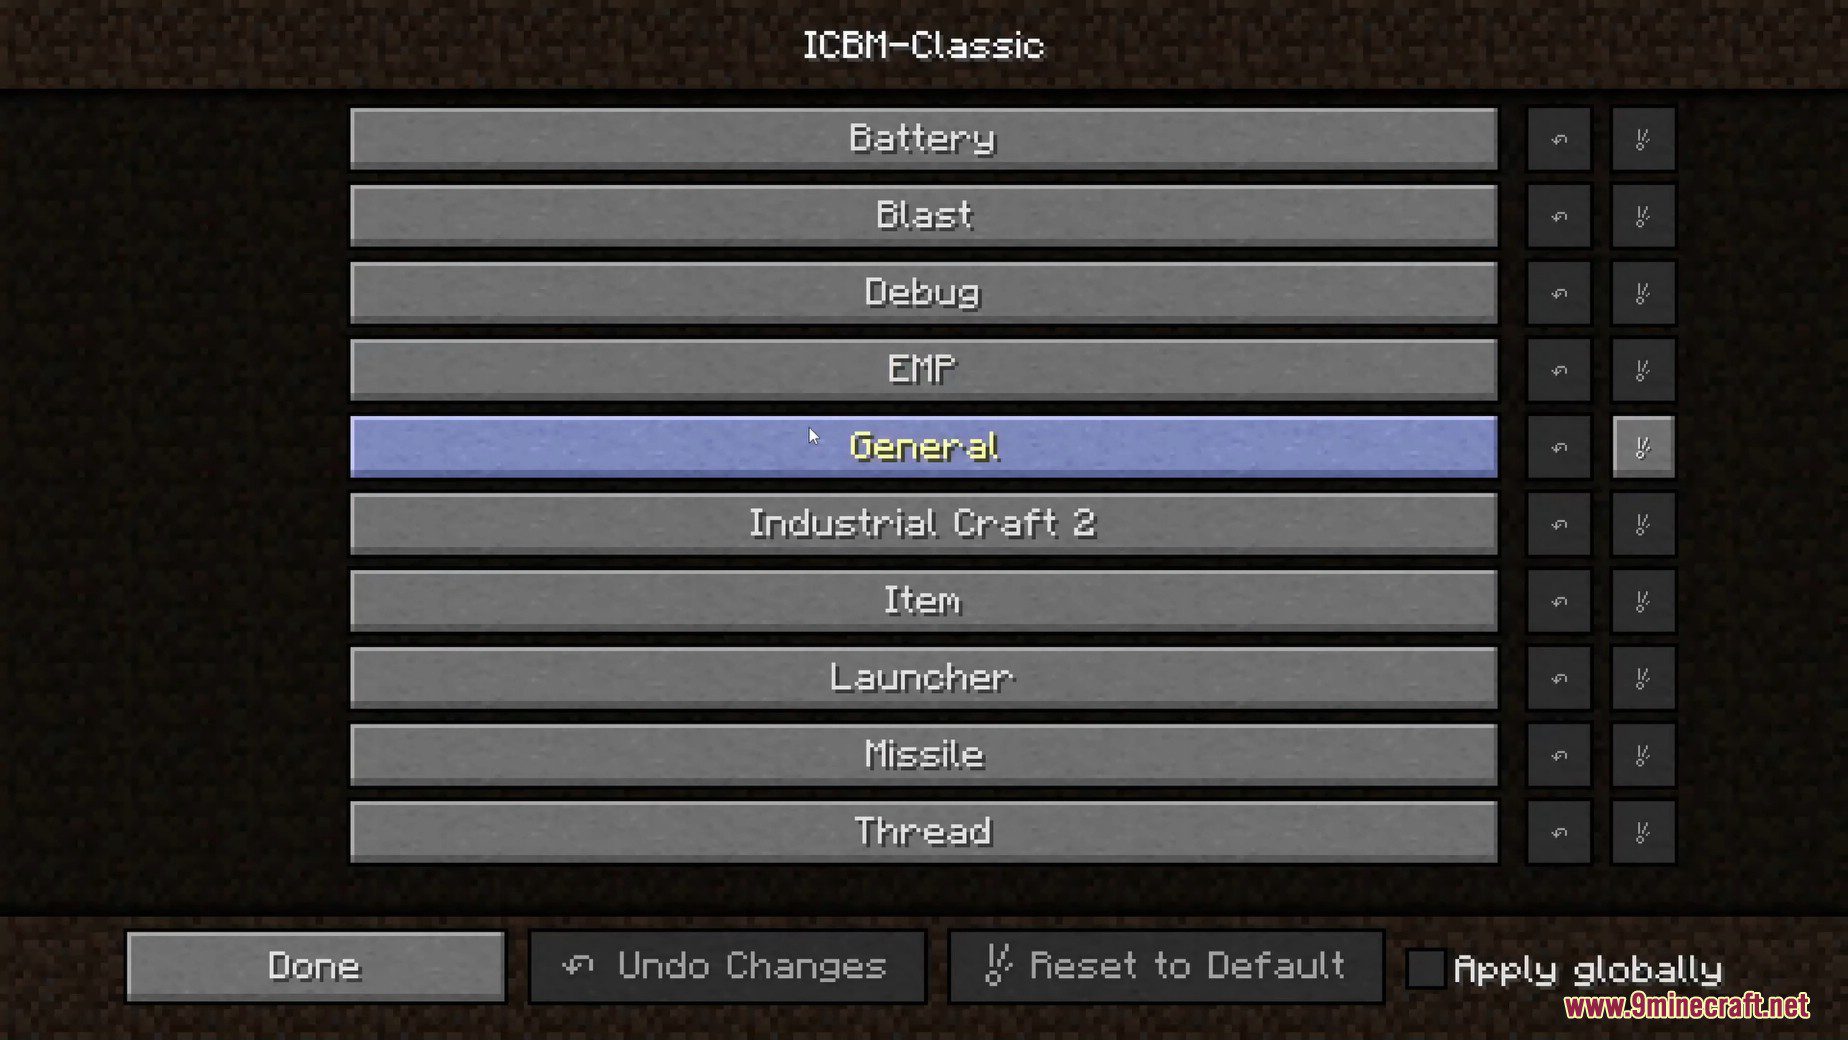 ICBM Classic Mod (1.12.2, 1.7.10) - Missiles, Nuclear Bomb, Explosives 3